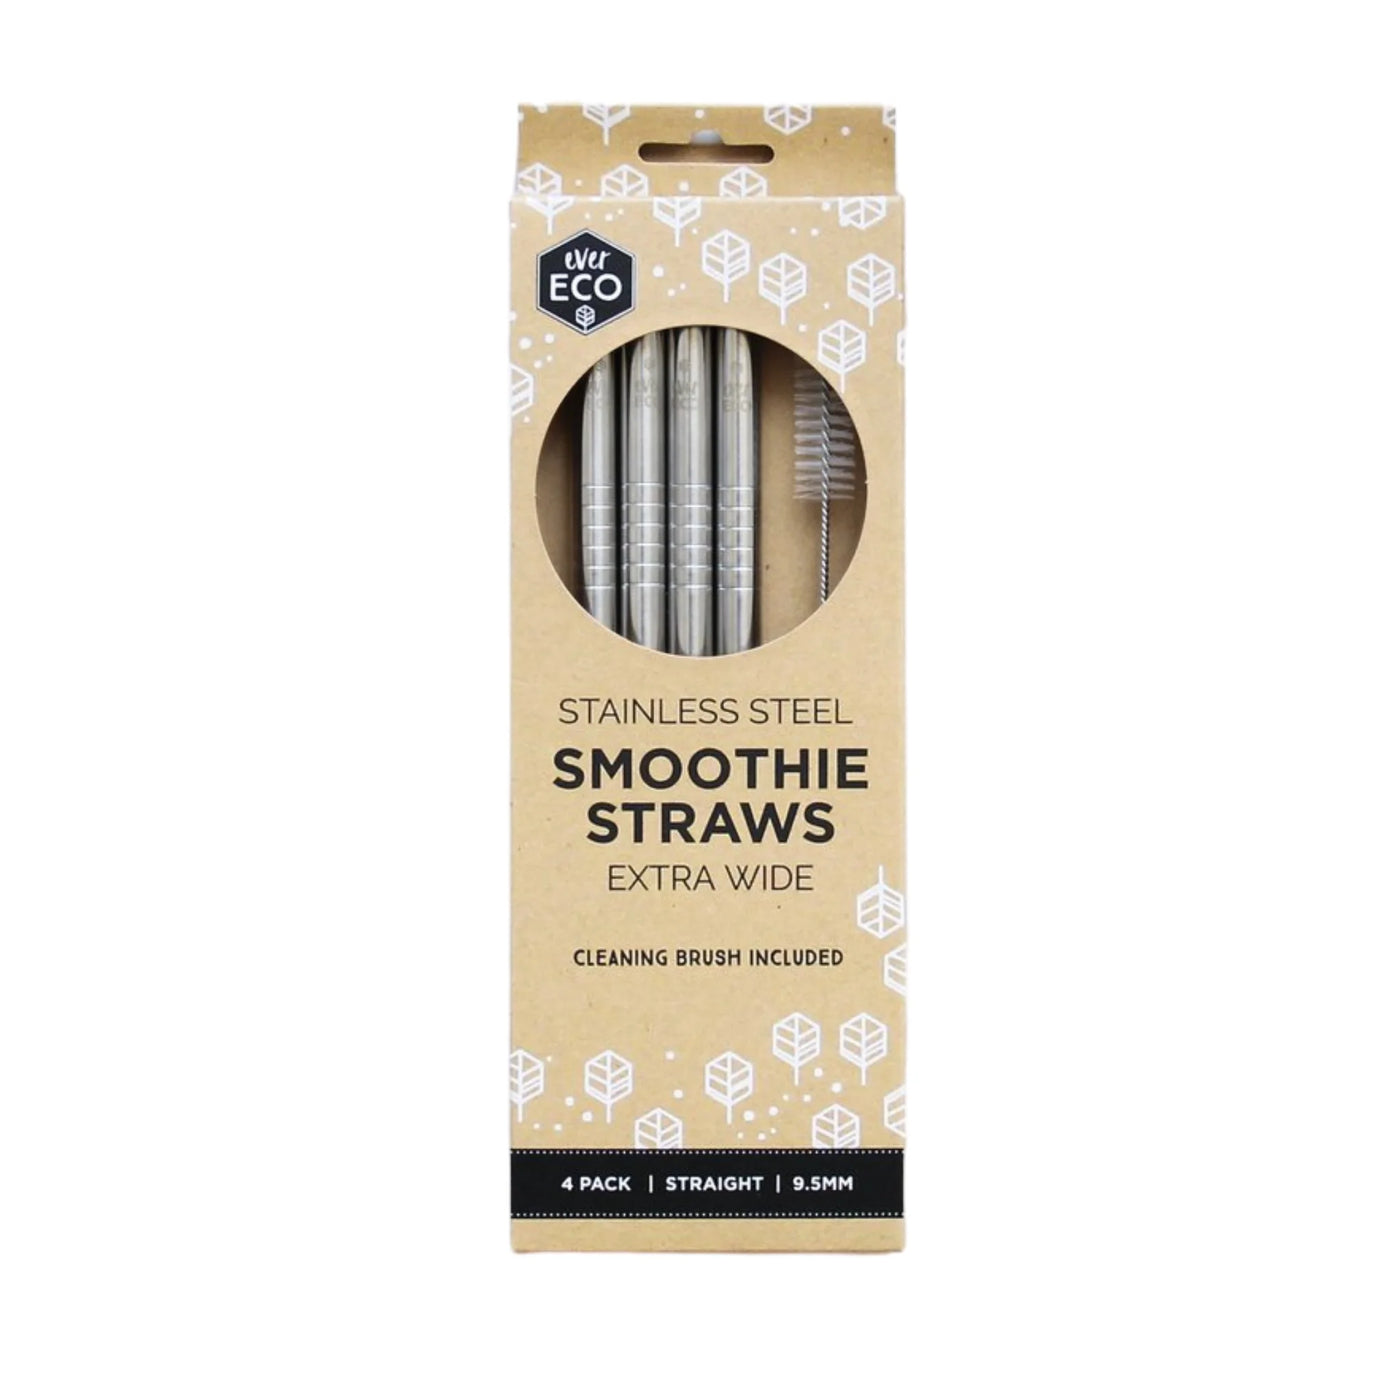 Stainless Steel Straws (7966696800531)